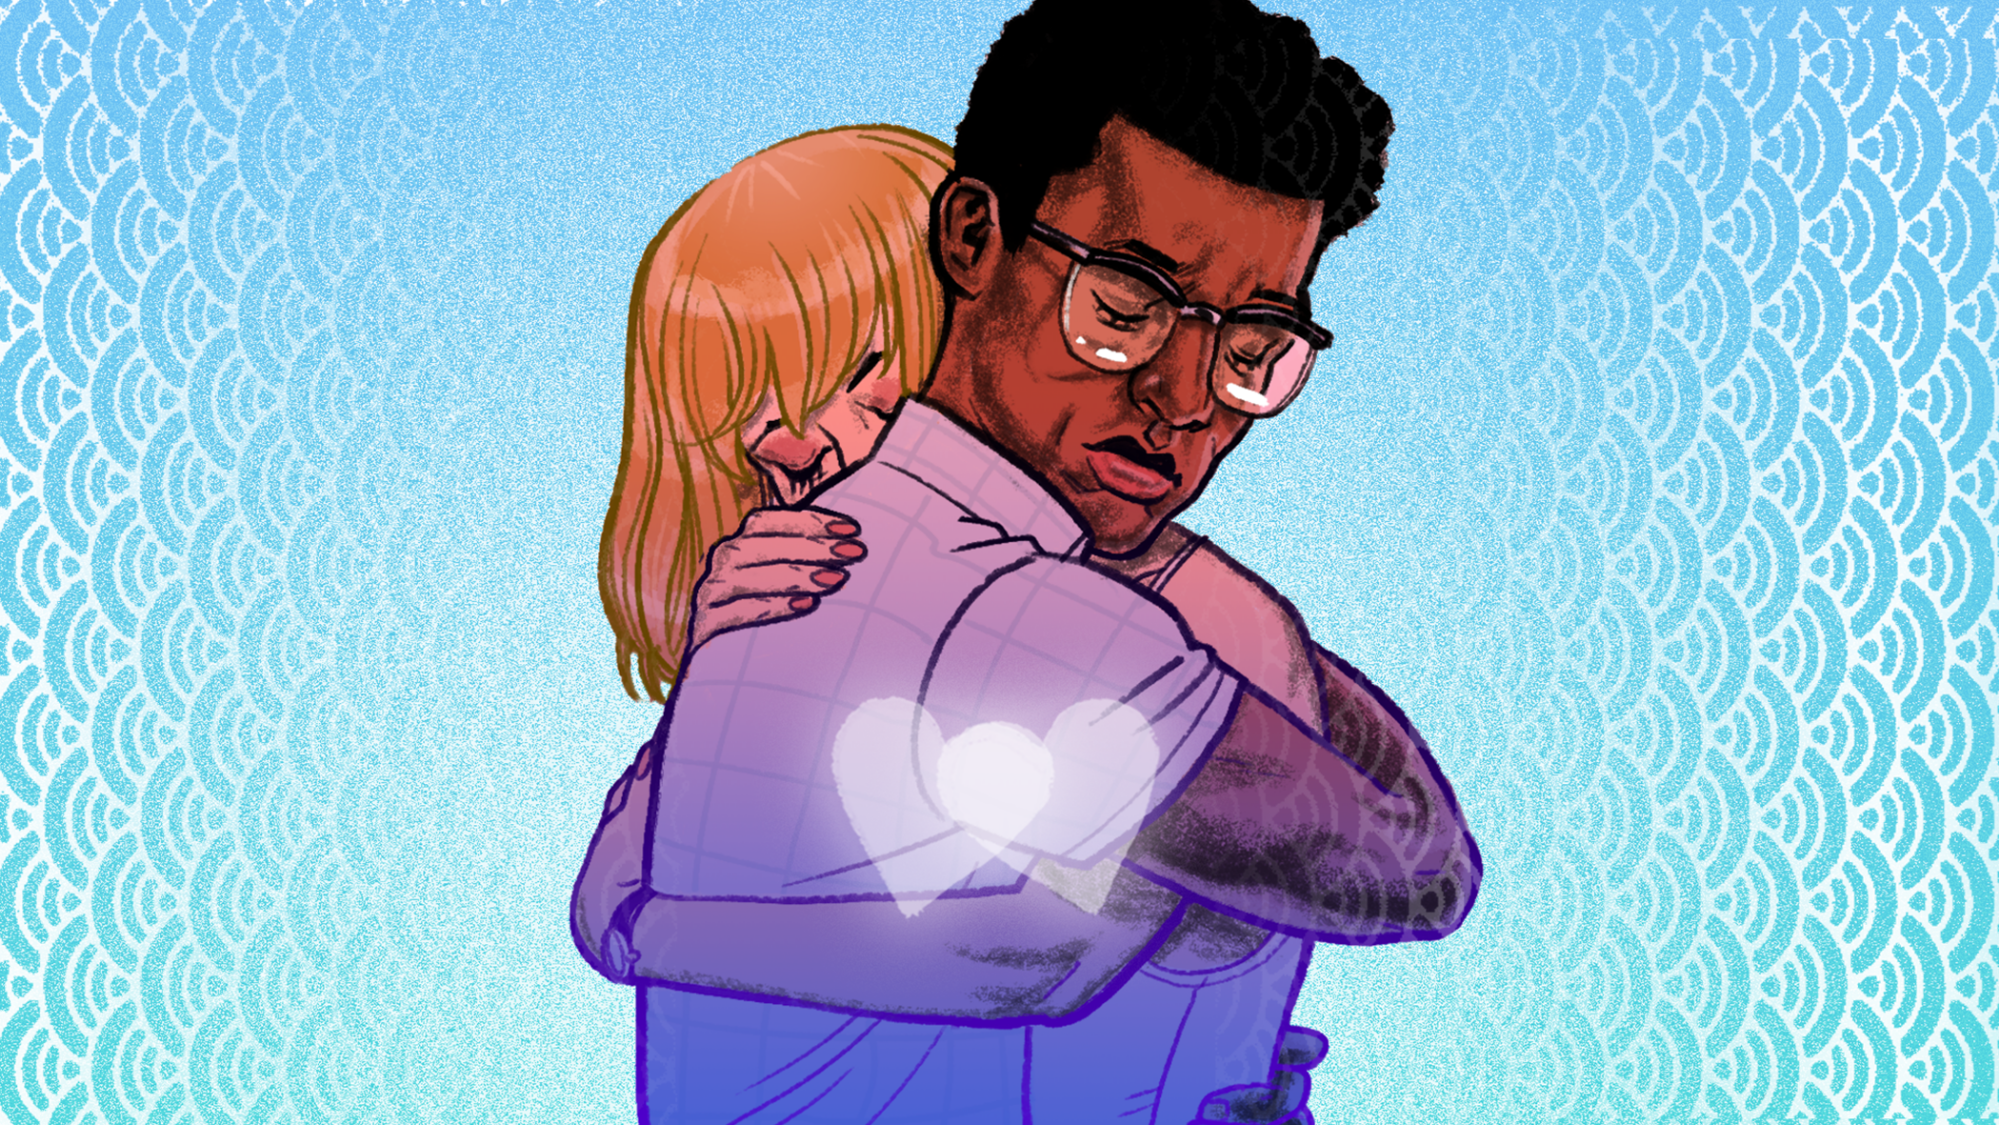 Two people hug and look sad in an illustration.